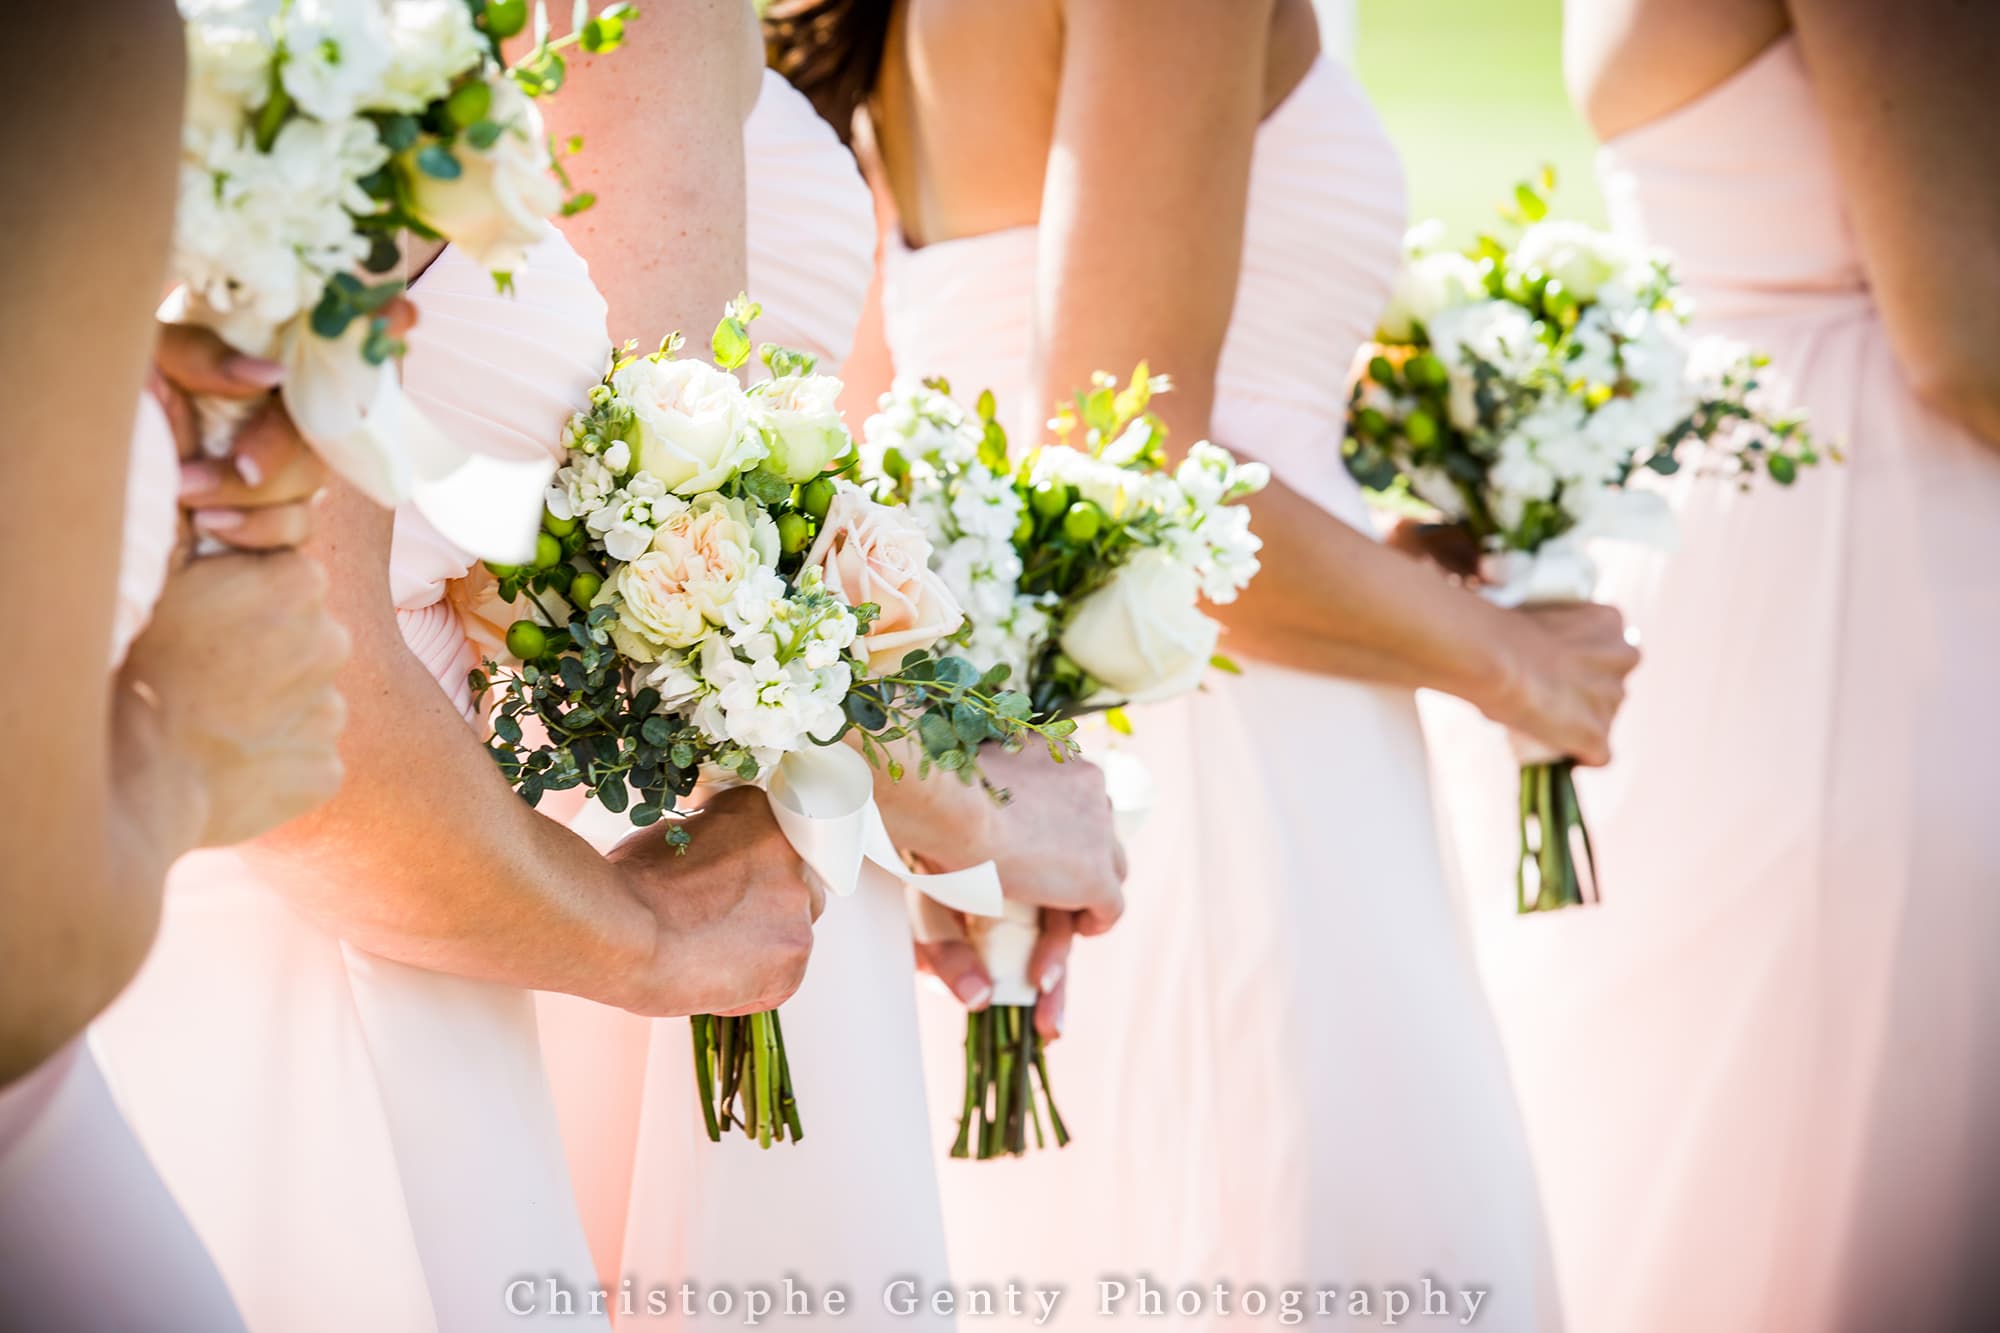 Wedding photography at the Vintners Golf Club in Yountville, CA